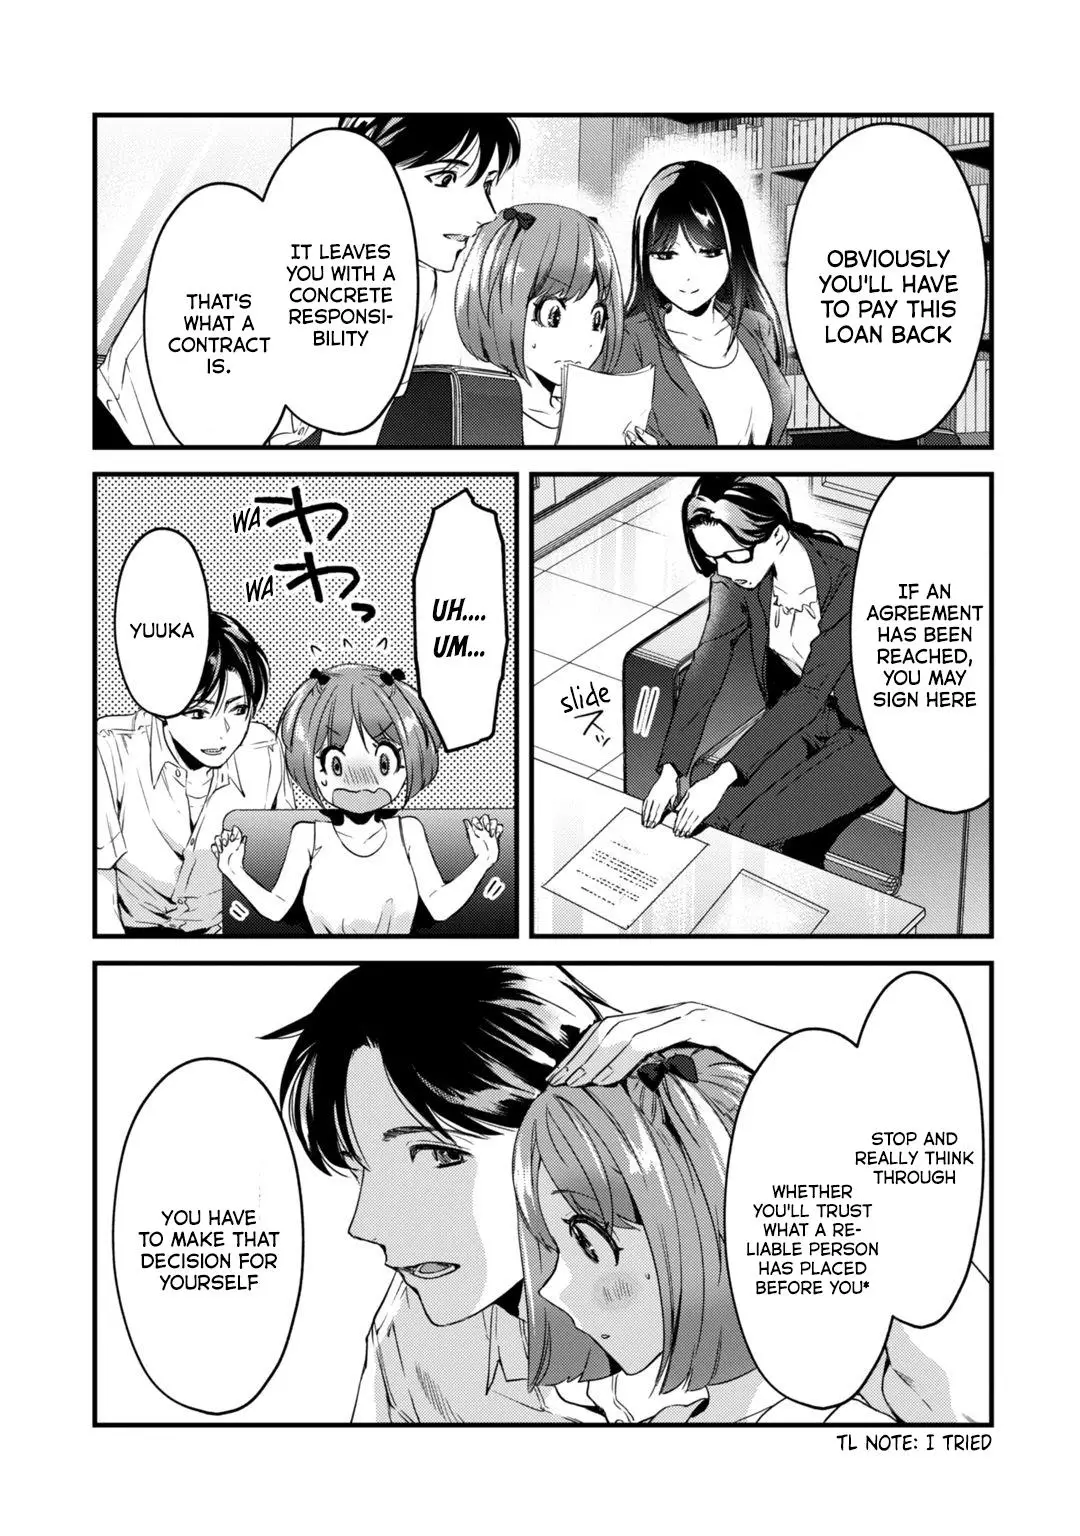 It’S Fun Having A 300,000 Yen A Month Job Welcoming Home An Onee-San Who Doesn’T Find Meaning In A Job That Pays Her 500,000 Yen A Month - 19 page 8-fb95d4f4